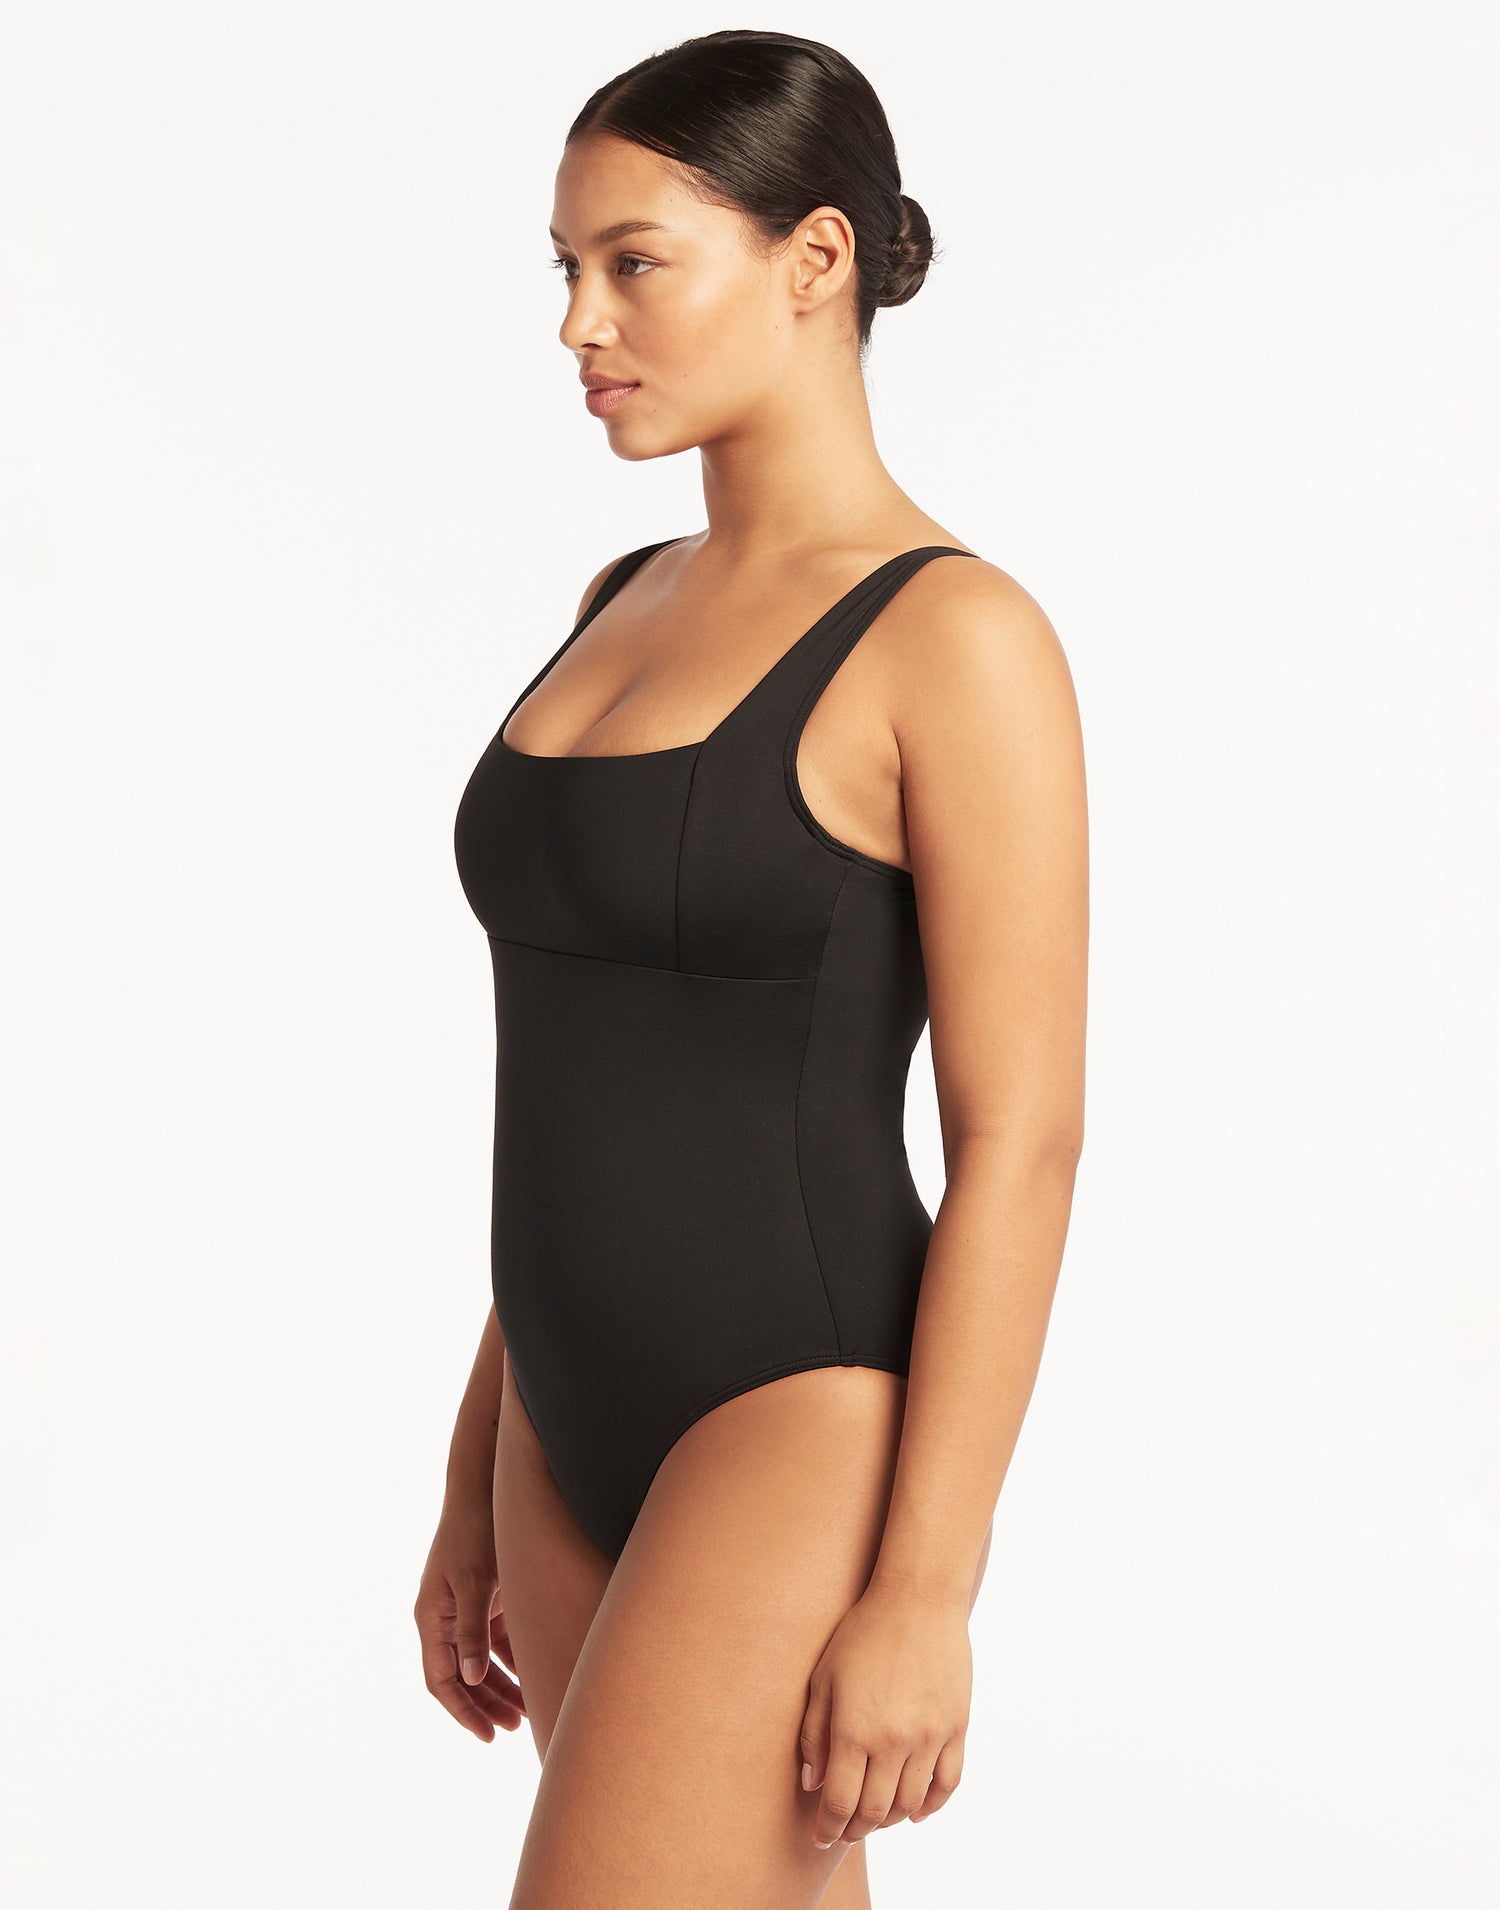 Essentials Square Neck One Piece by Sea Level in Black - Angled View